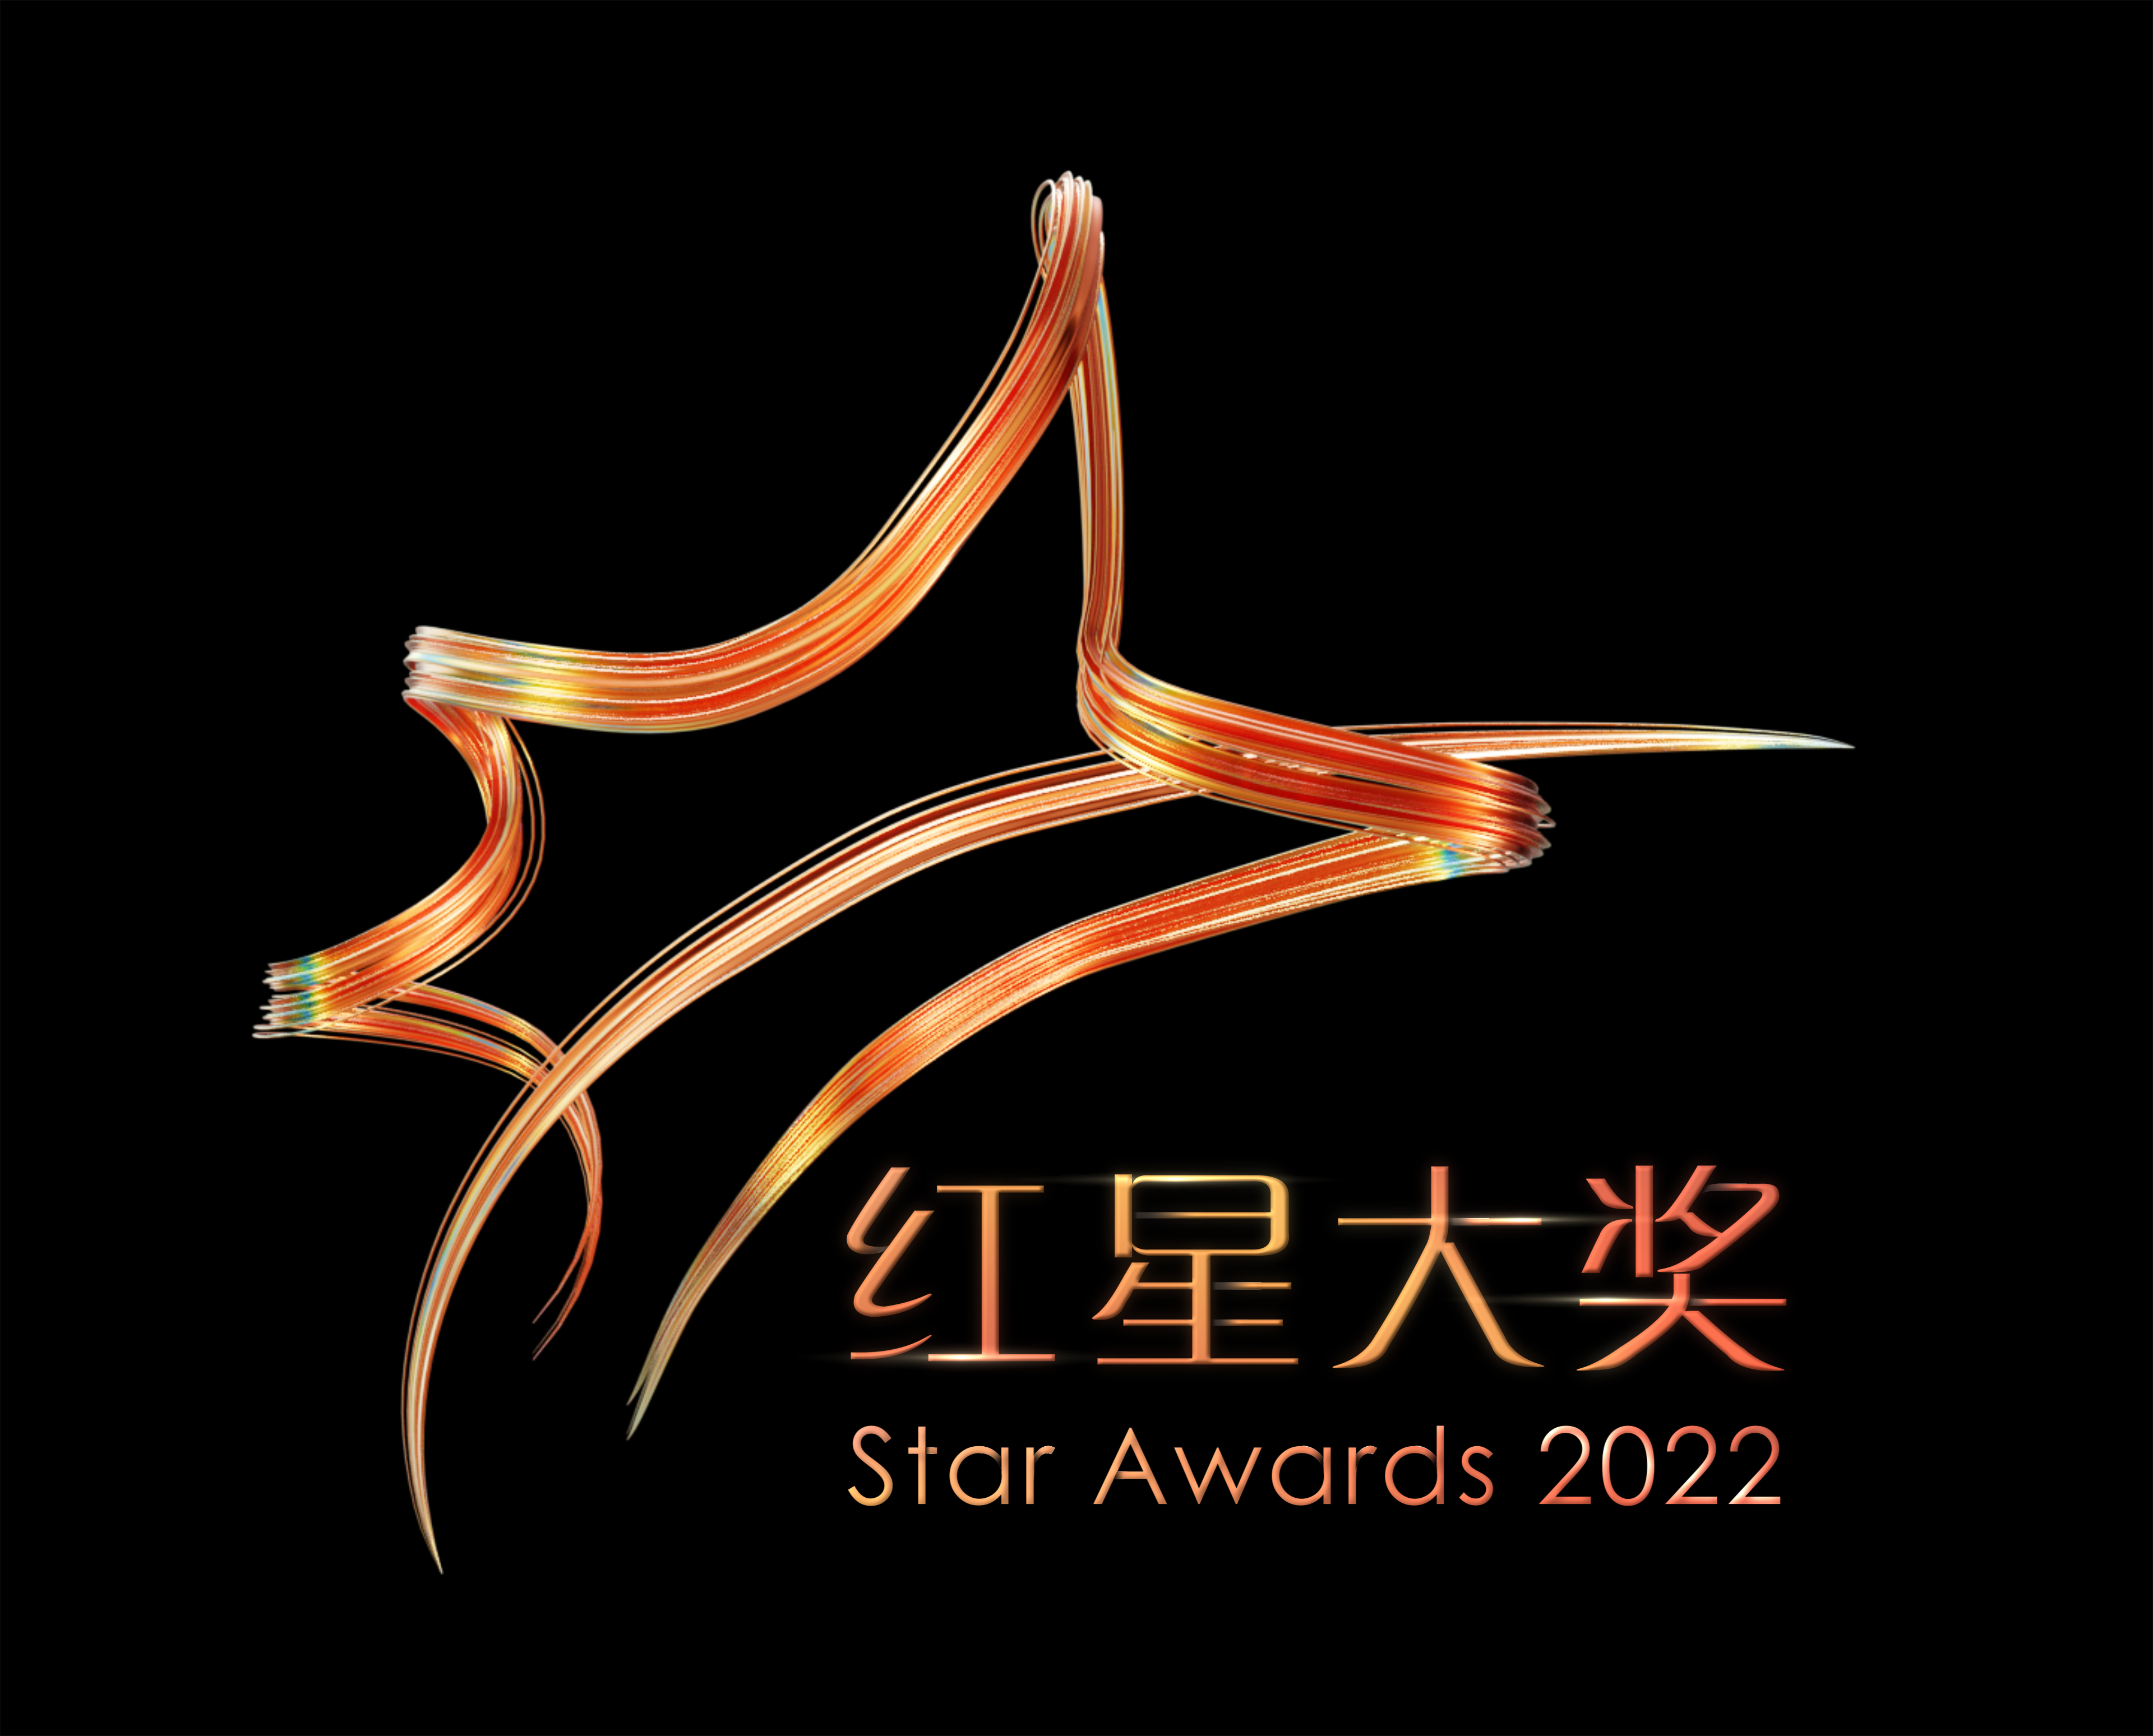 Star Awards 2022 A Dazzling Night at Stars Avenue! Mediacorp